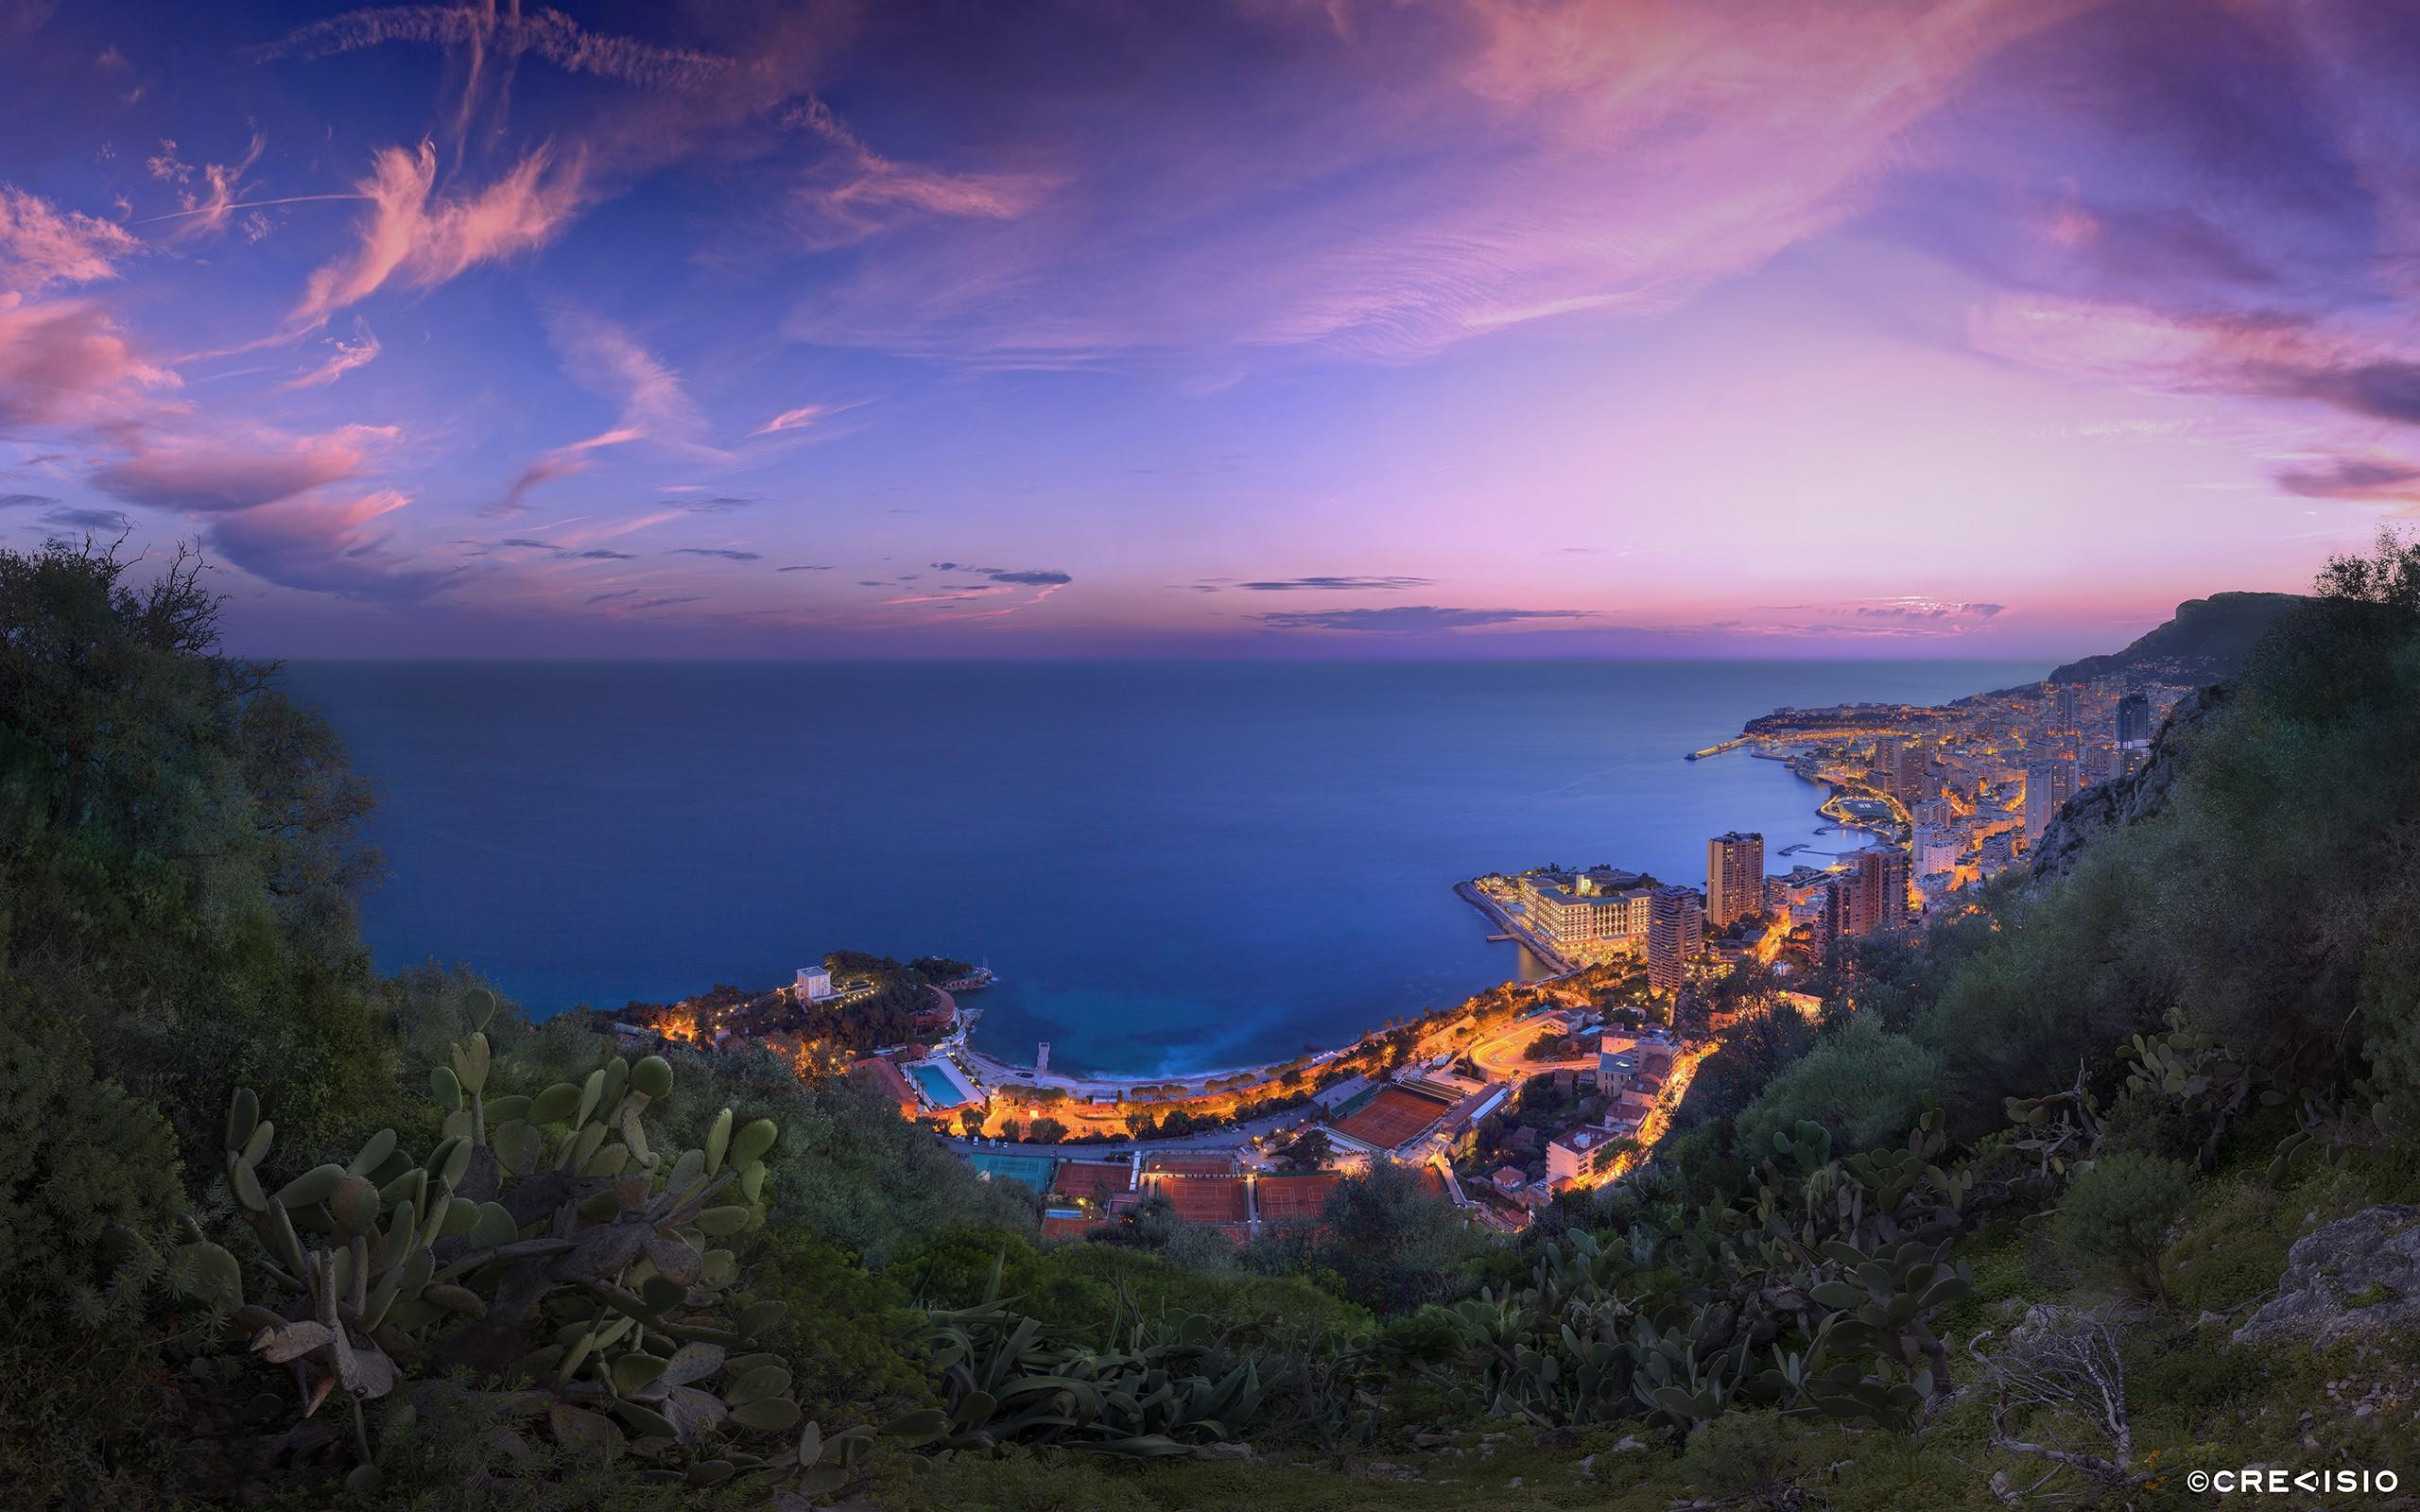 Monaco Winter Sunset Clouds. Crevisio. Branding & Photography Agency